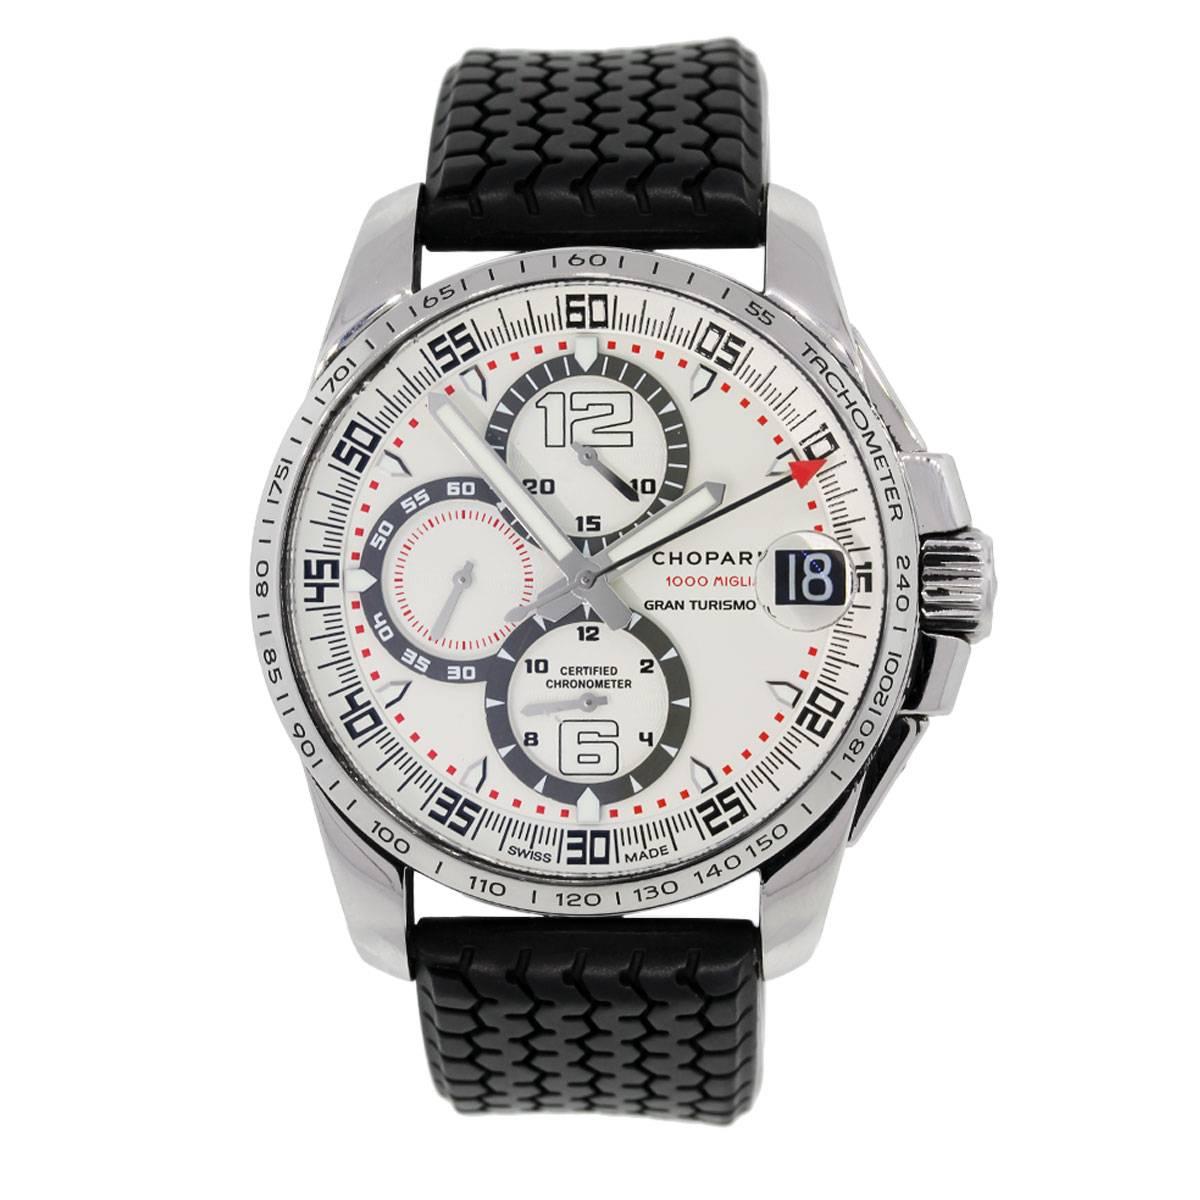 Brand: Chopard
Style: Gran Turismo GT XL
MPN: 1673449-8459
Case Material: Stainless steel
Case Diameter: 44mm
Bezel: Stainless steel
Dial: White chronograph dial
Bracelet: Rubber strap (factory)
Crystal: Sapphire
Size: Will fit a 7.5